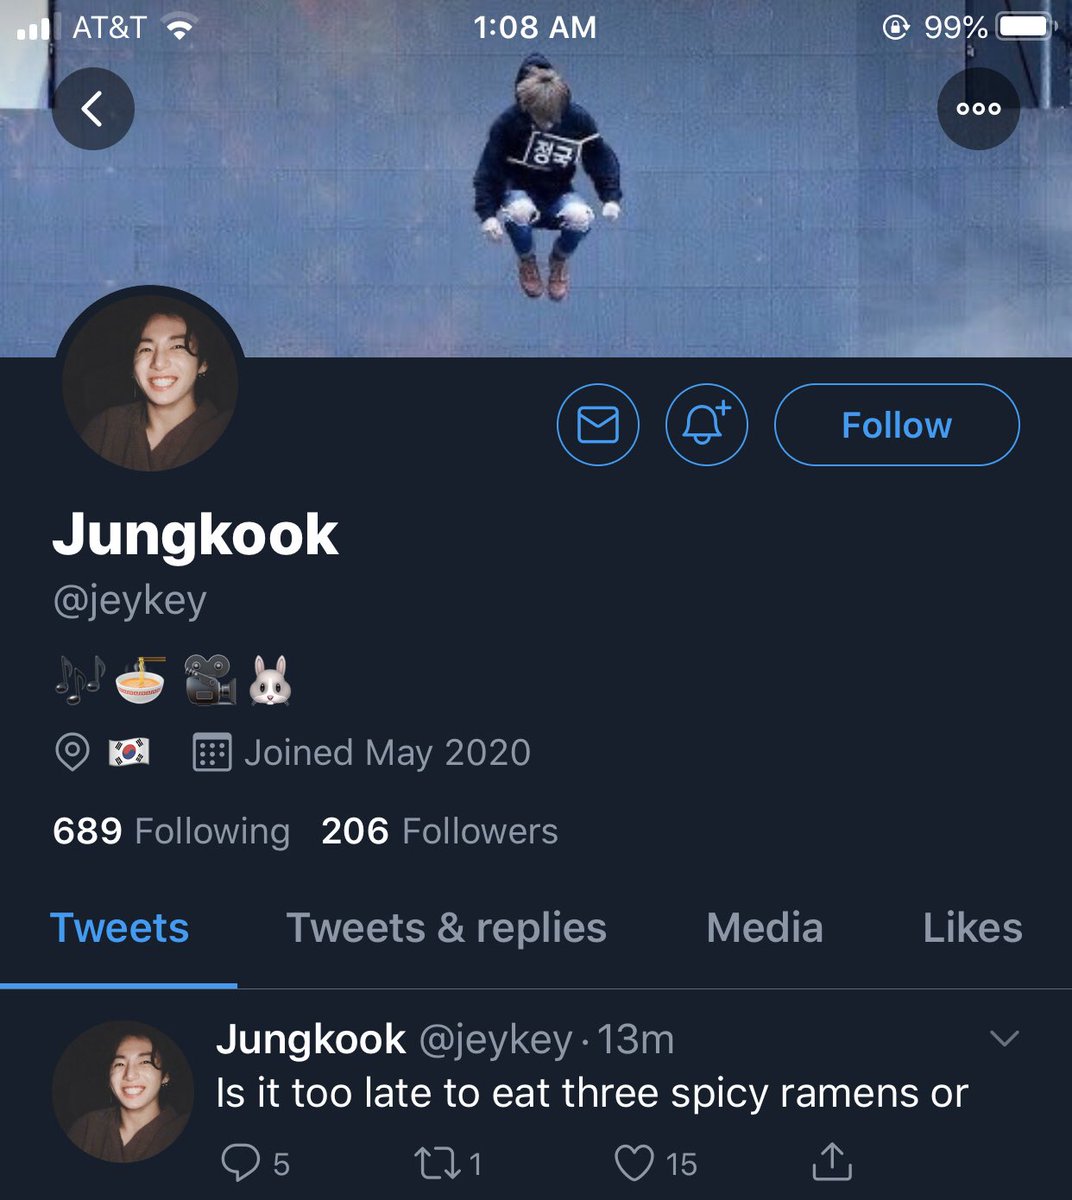 Kook’s profiles and his friend